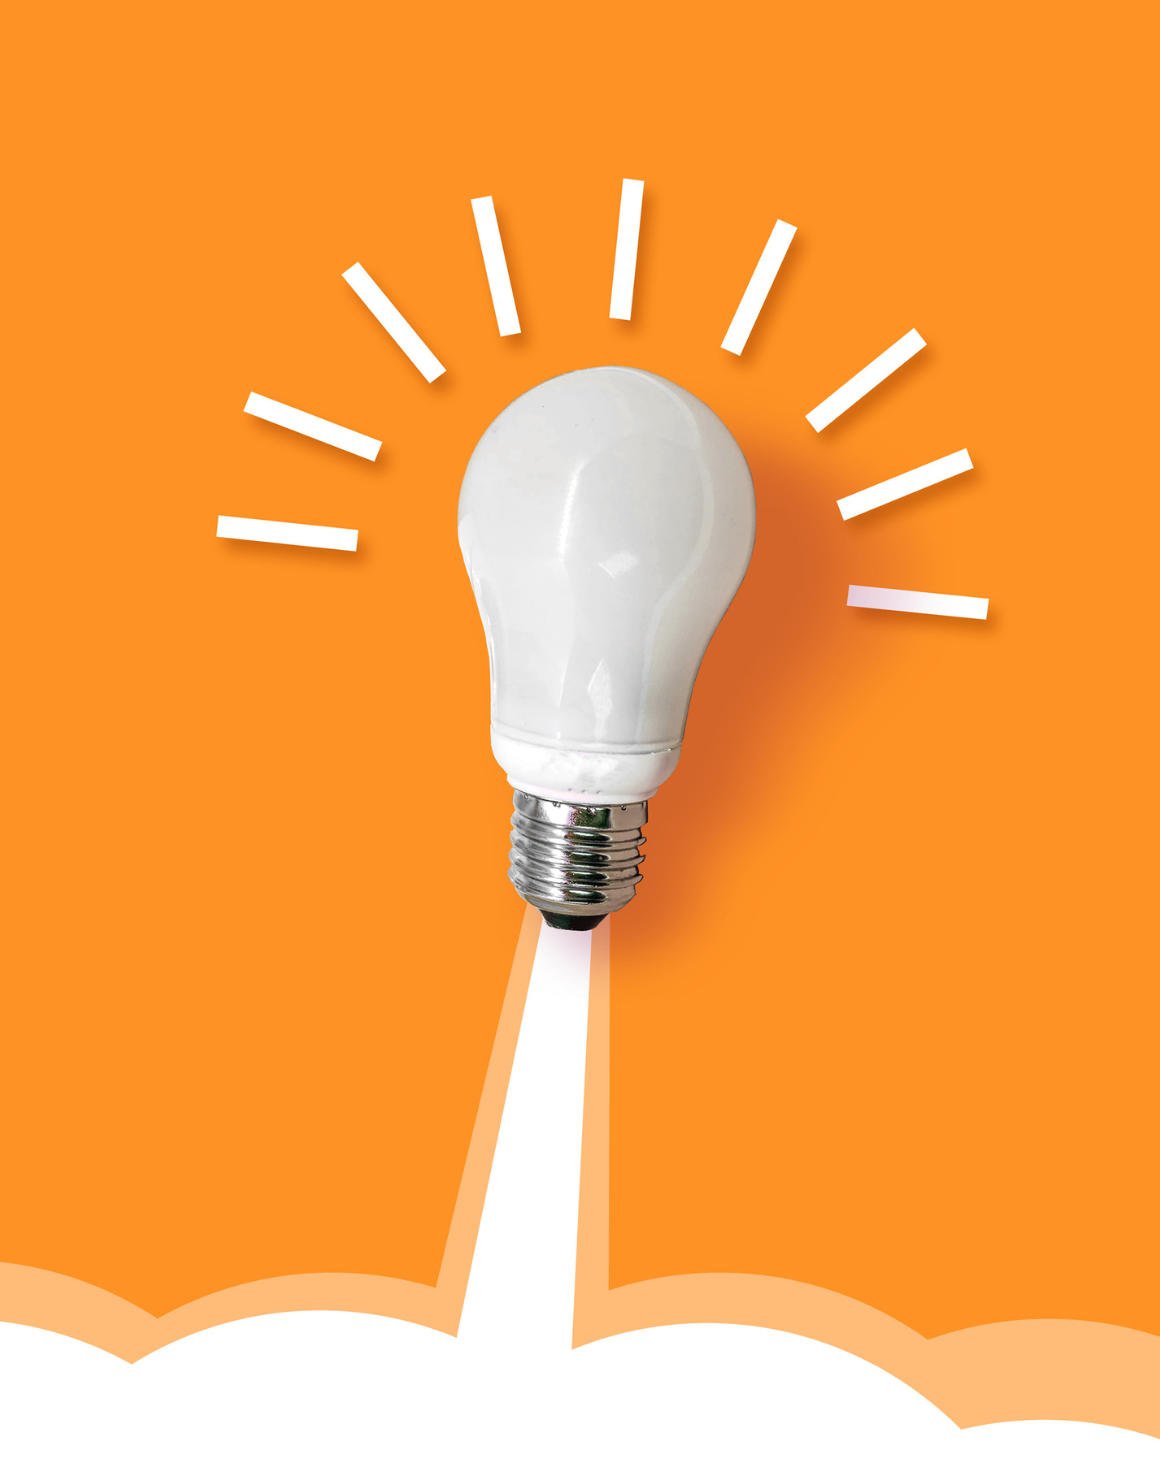 A white light bulb with boost cloud on an orange surface